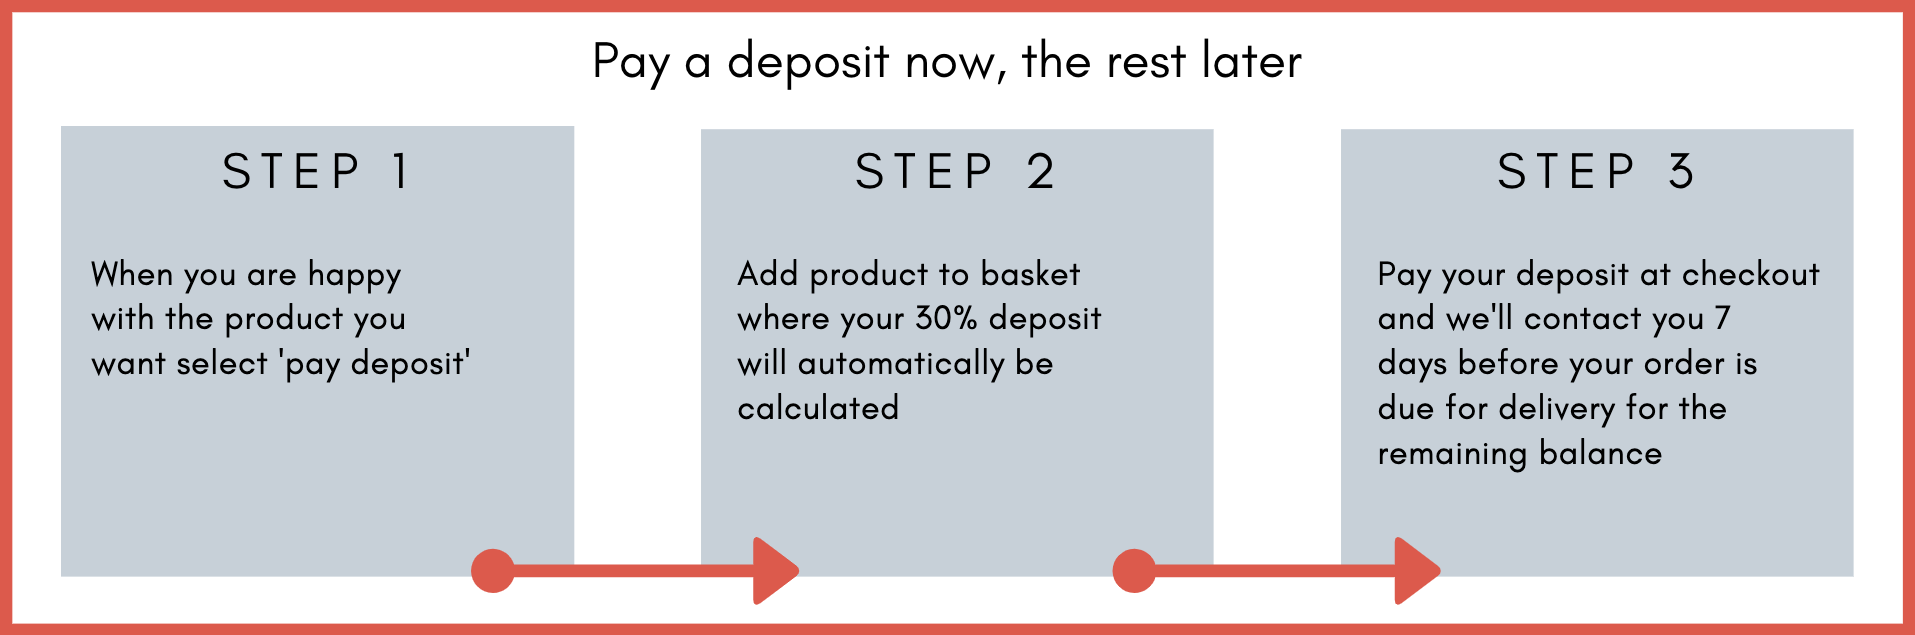 pay-a-deposit-now-banner